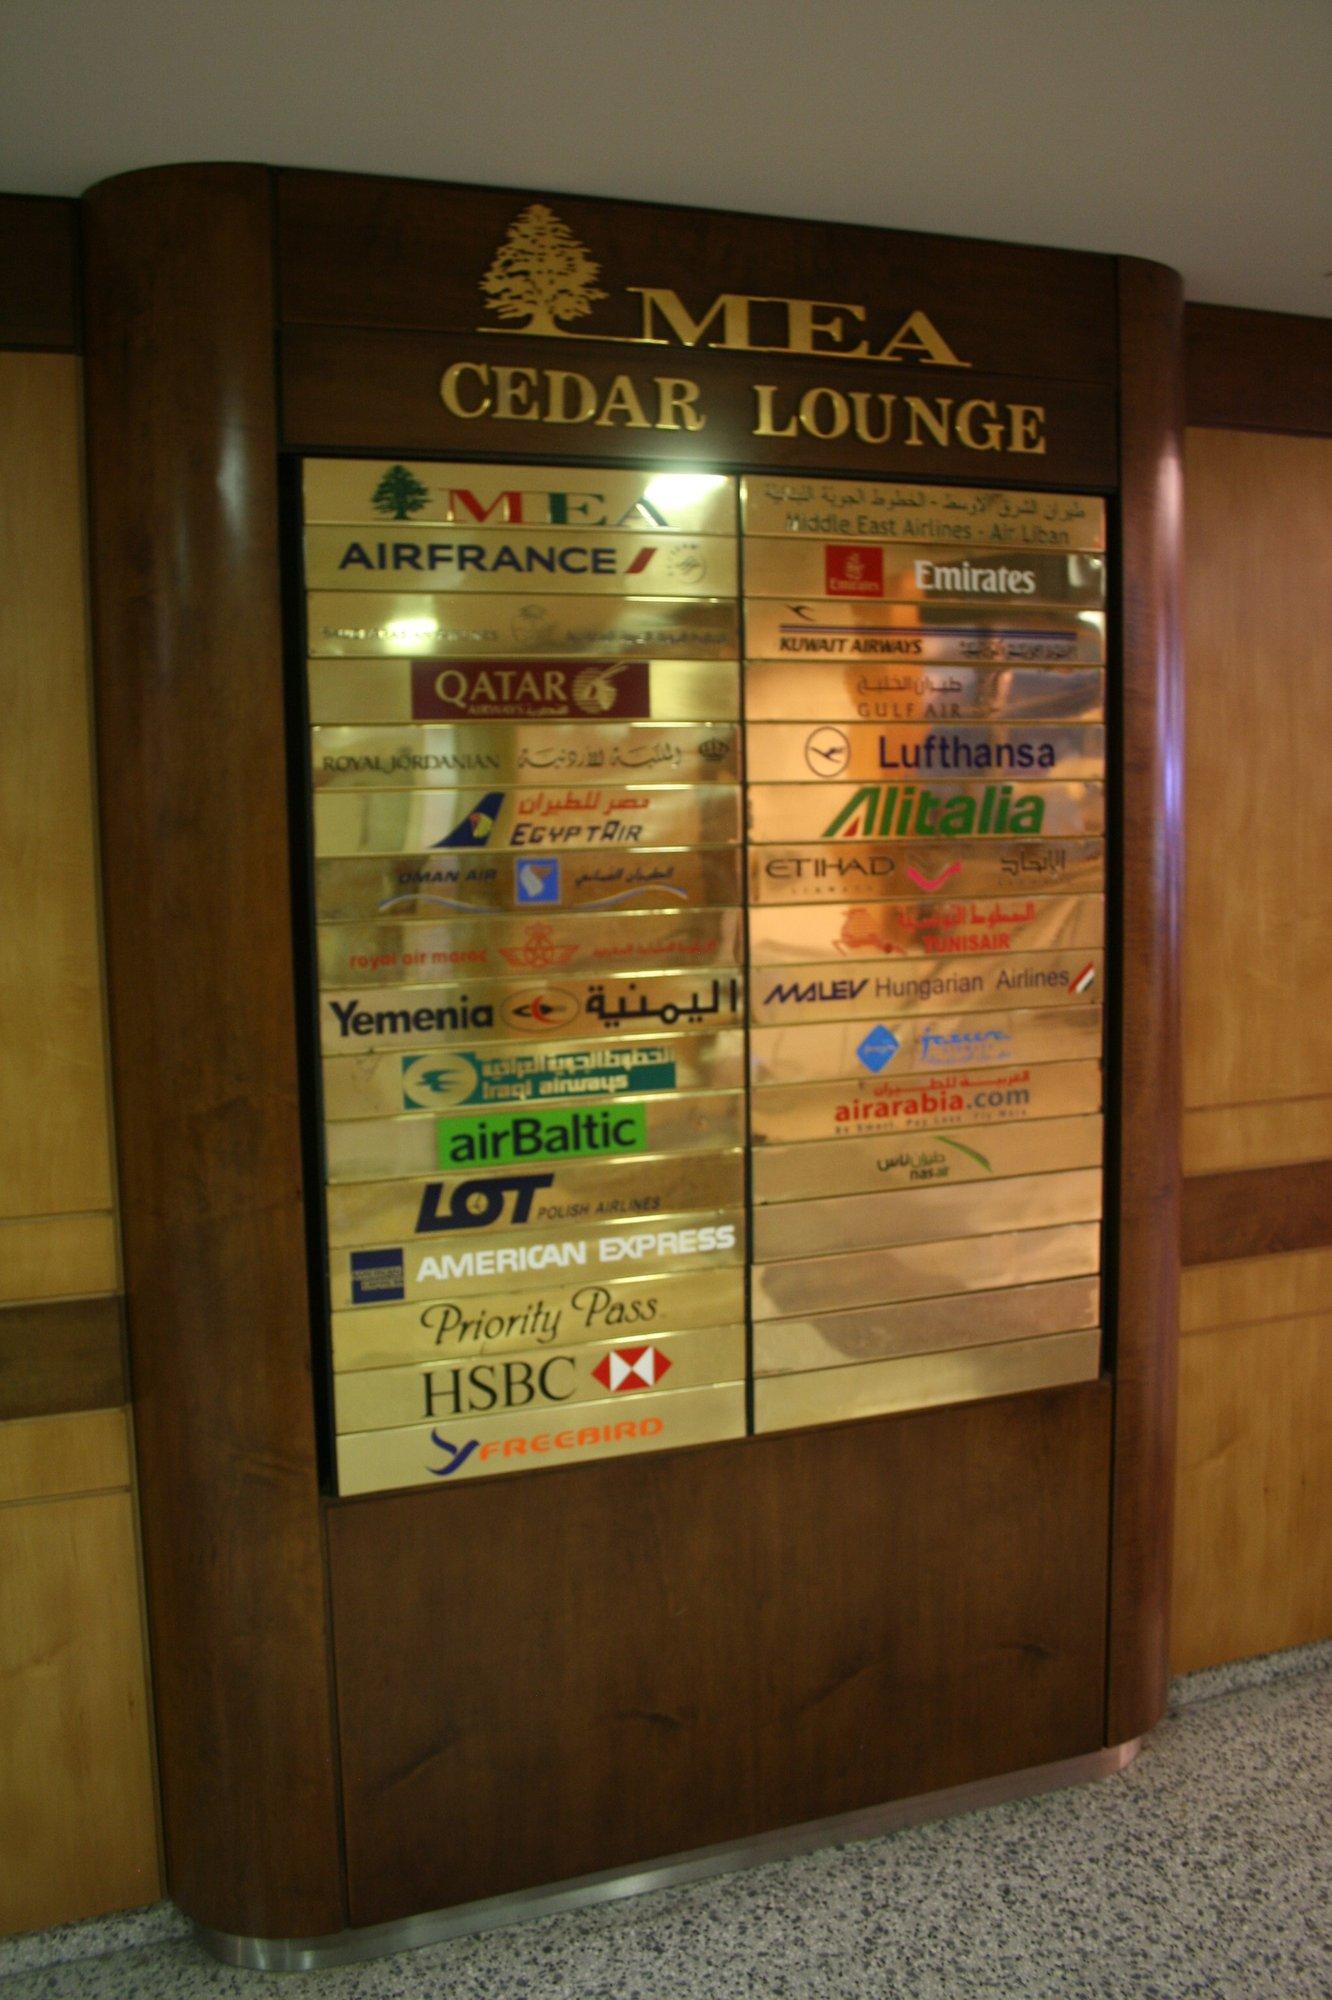 Middle East Airlines Cedar Lounge image 16 of 18